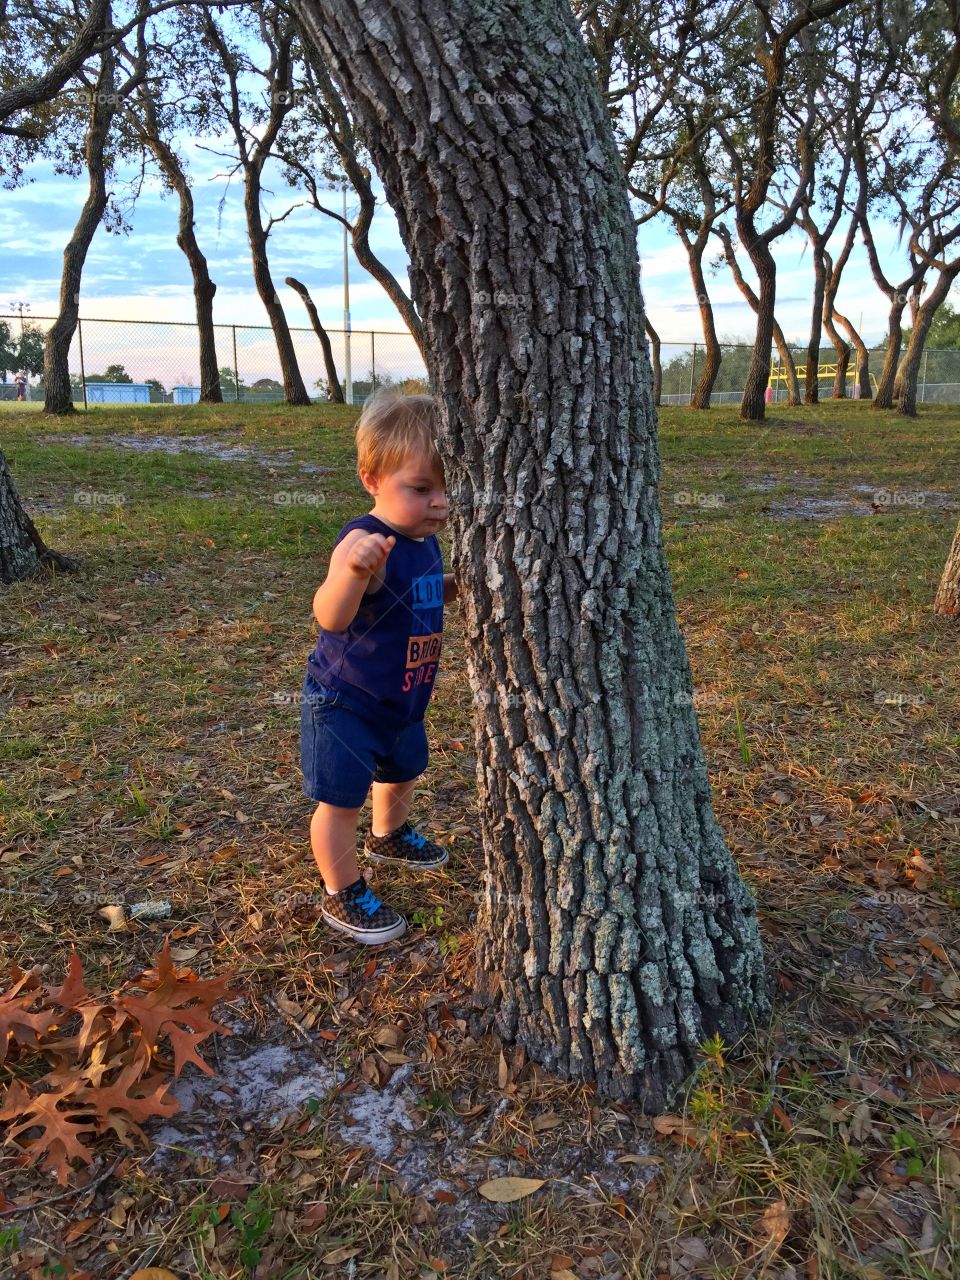 Toddler standing near tree trunk at park